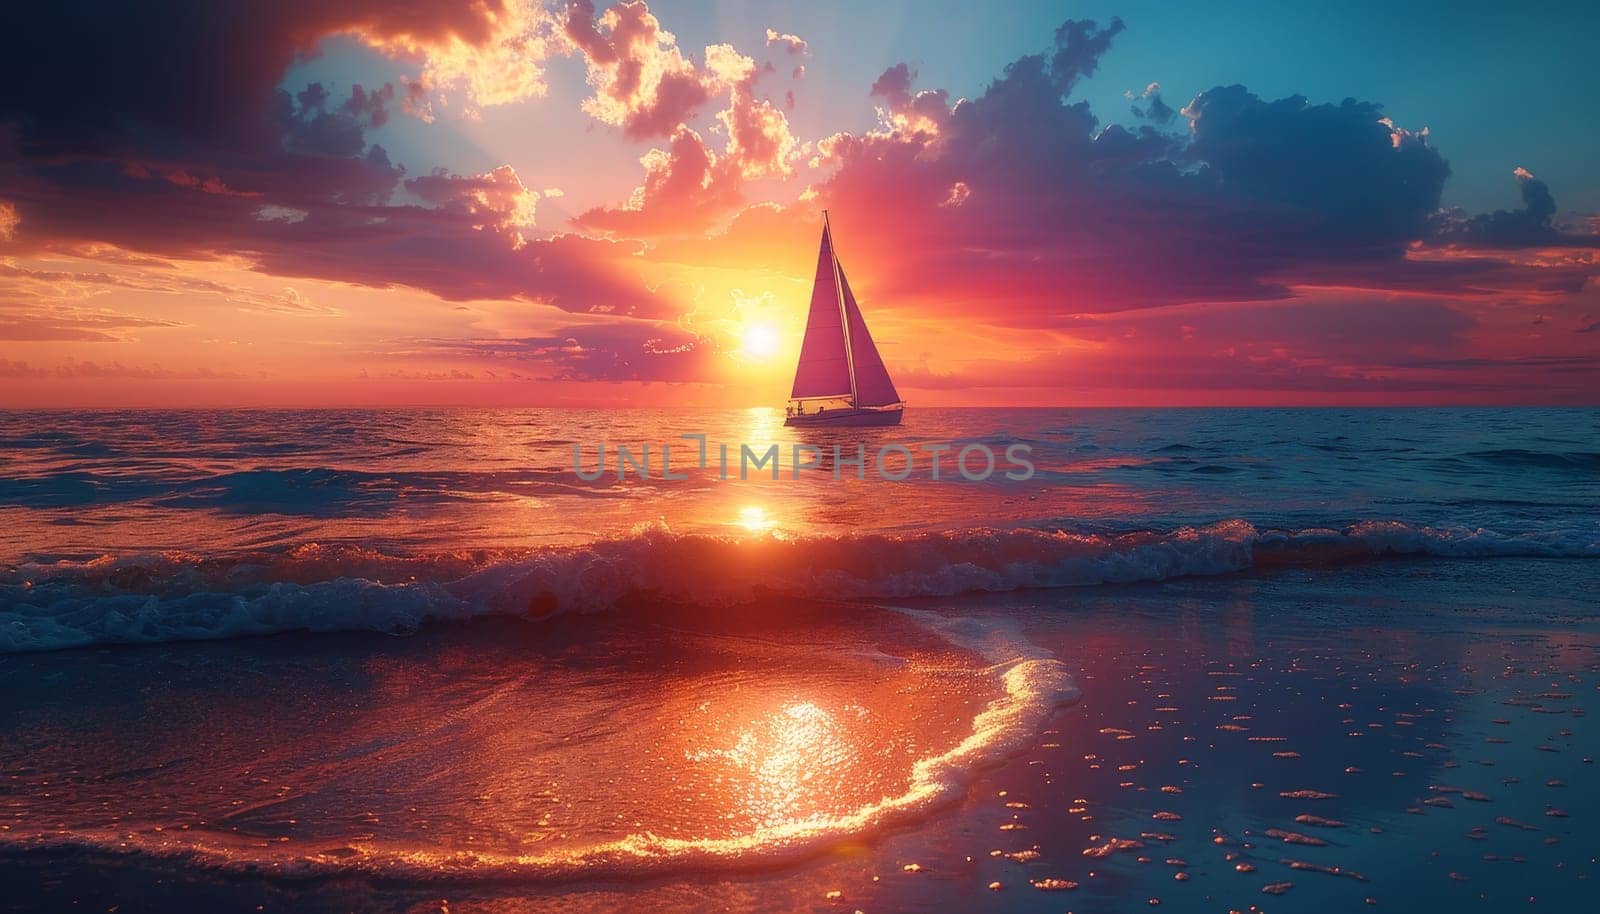 A sailboat is sailing on a beautiful, colorful ocean at sunset. The sky is filled with vibrant colors, creating a serene and peaceful atmosphere. The boat is the focal point of the scene